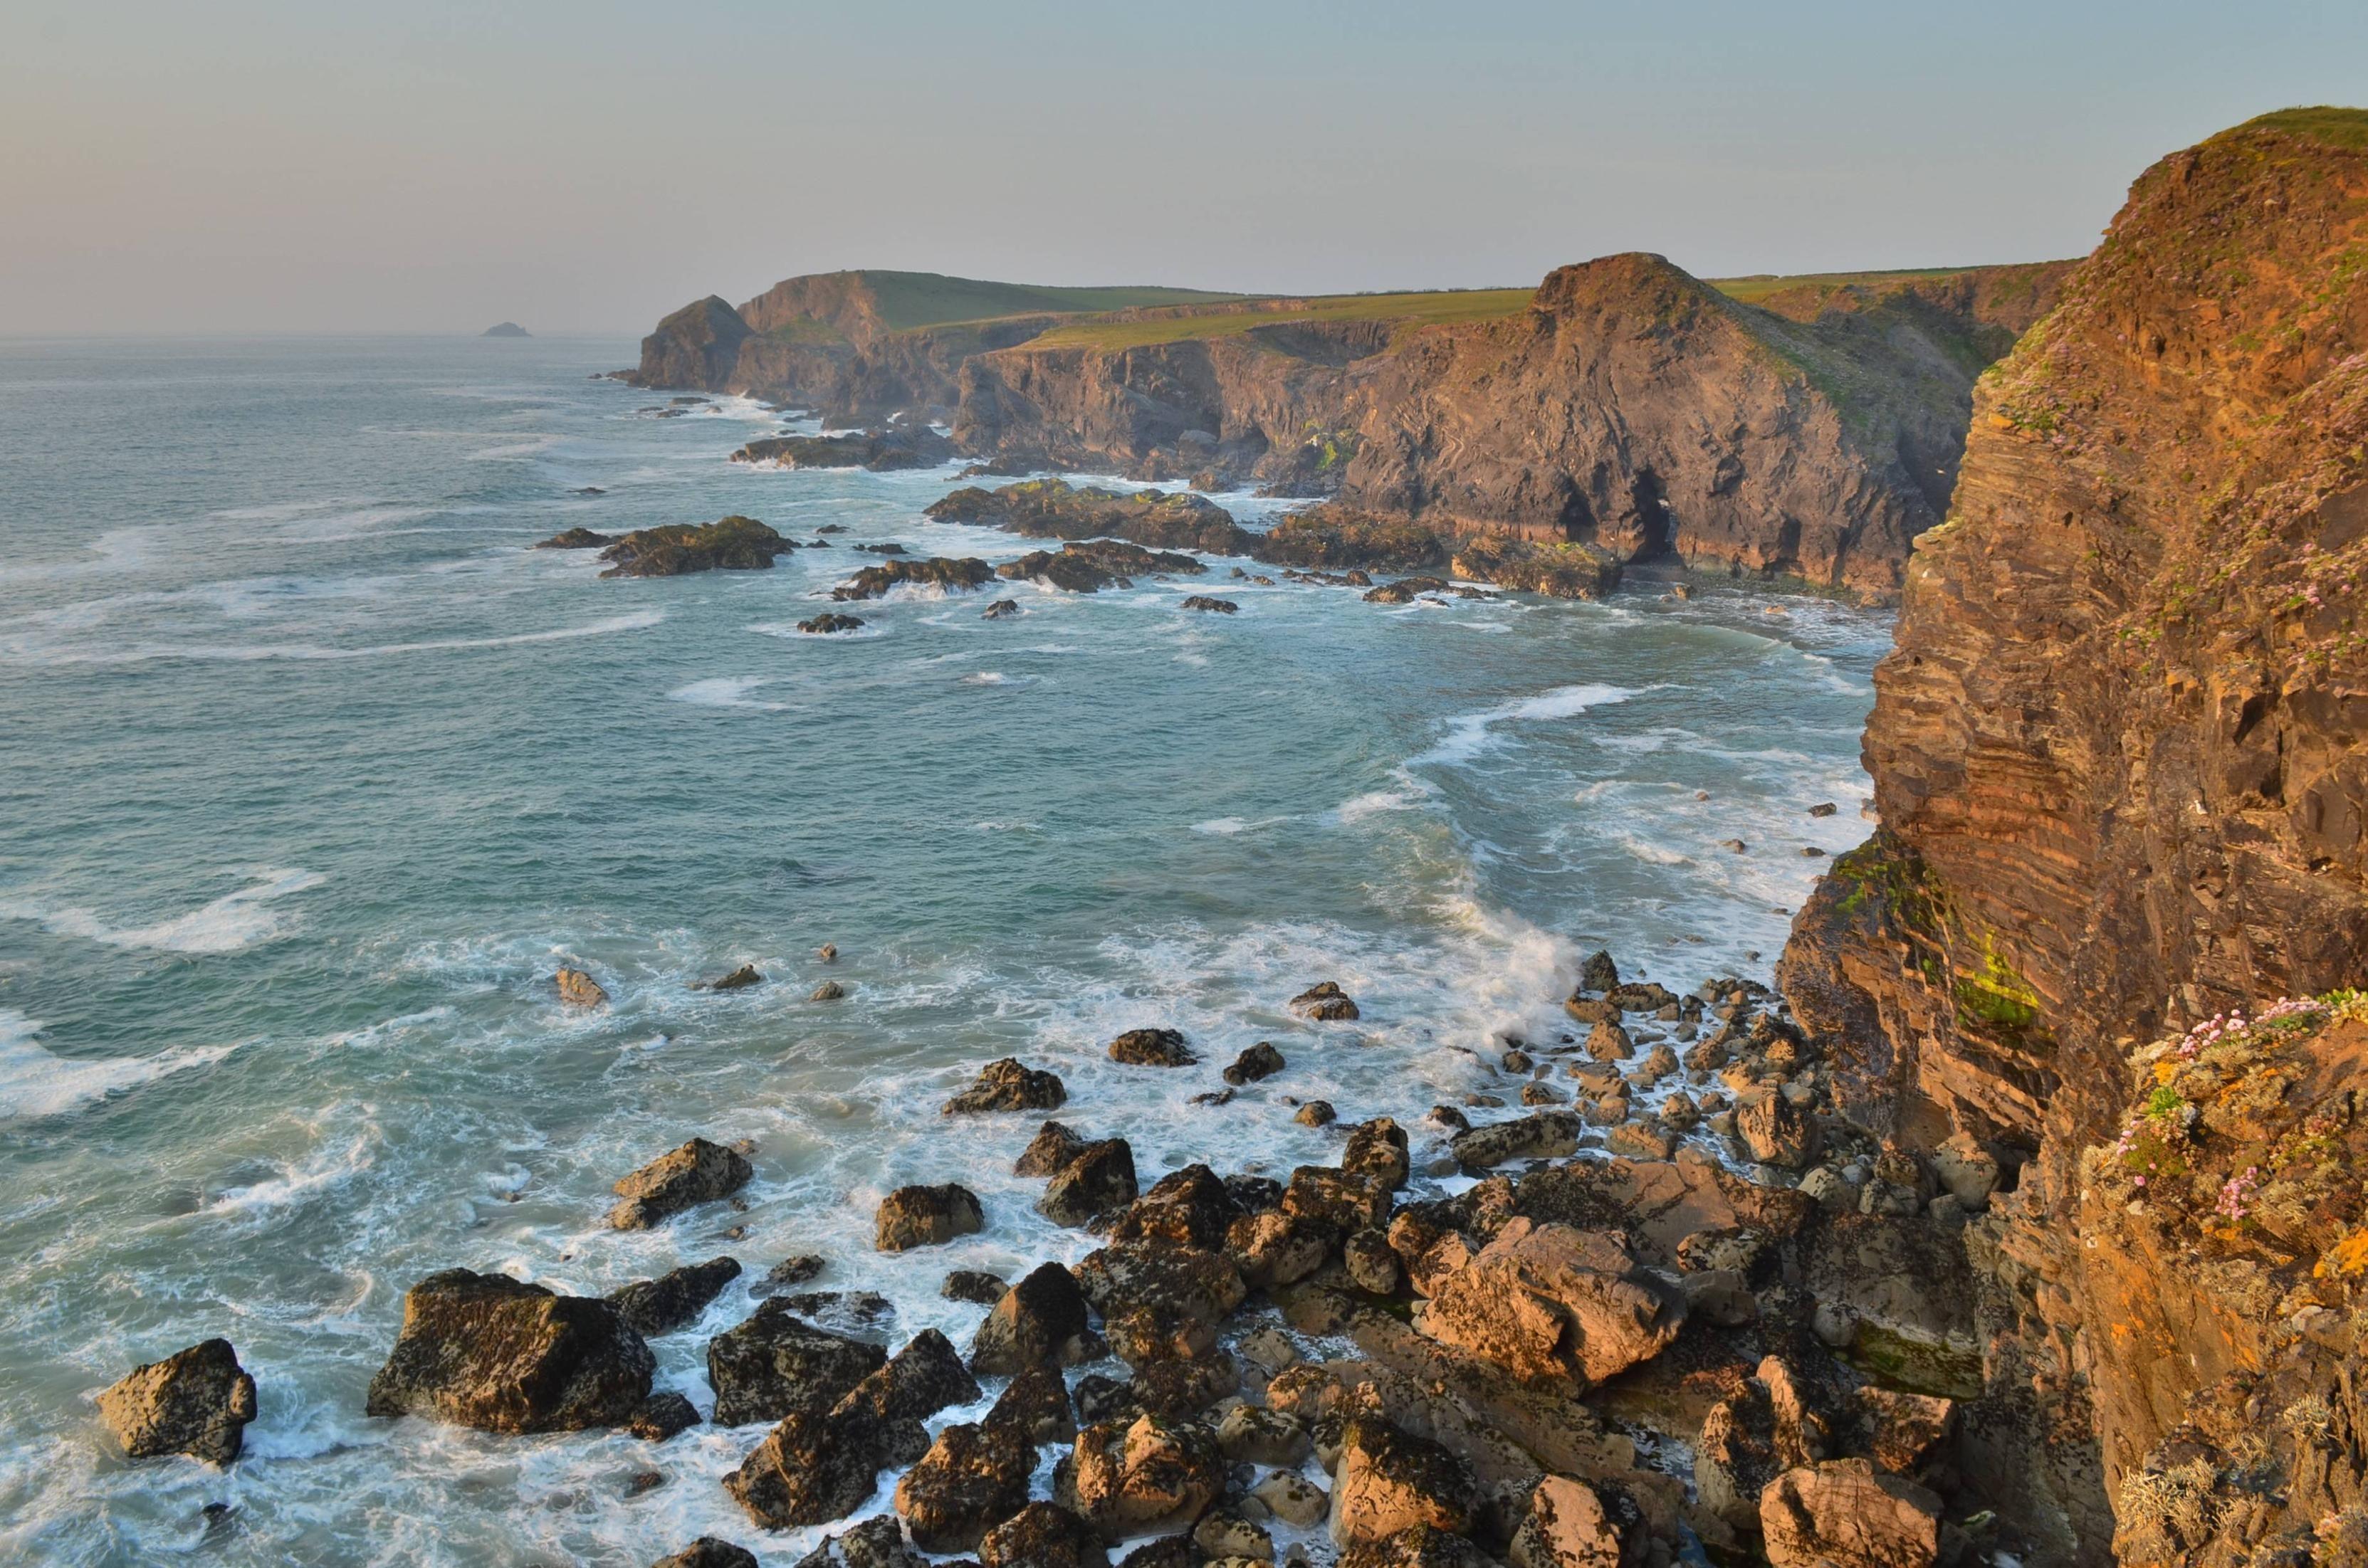 Headlands of Trevone Bay in Cornwall [3326 × 2203] HD Wallpaper From